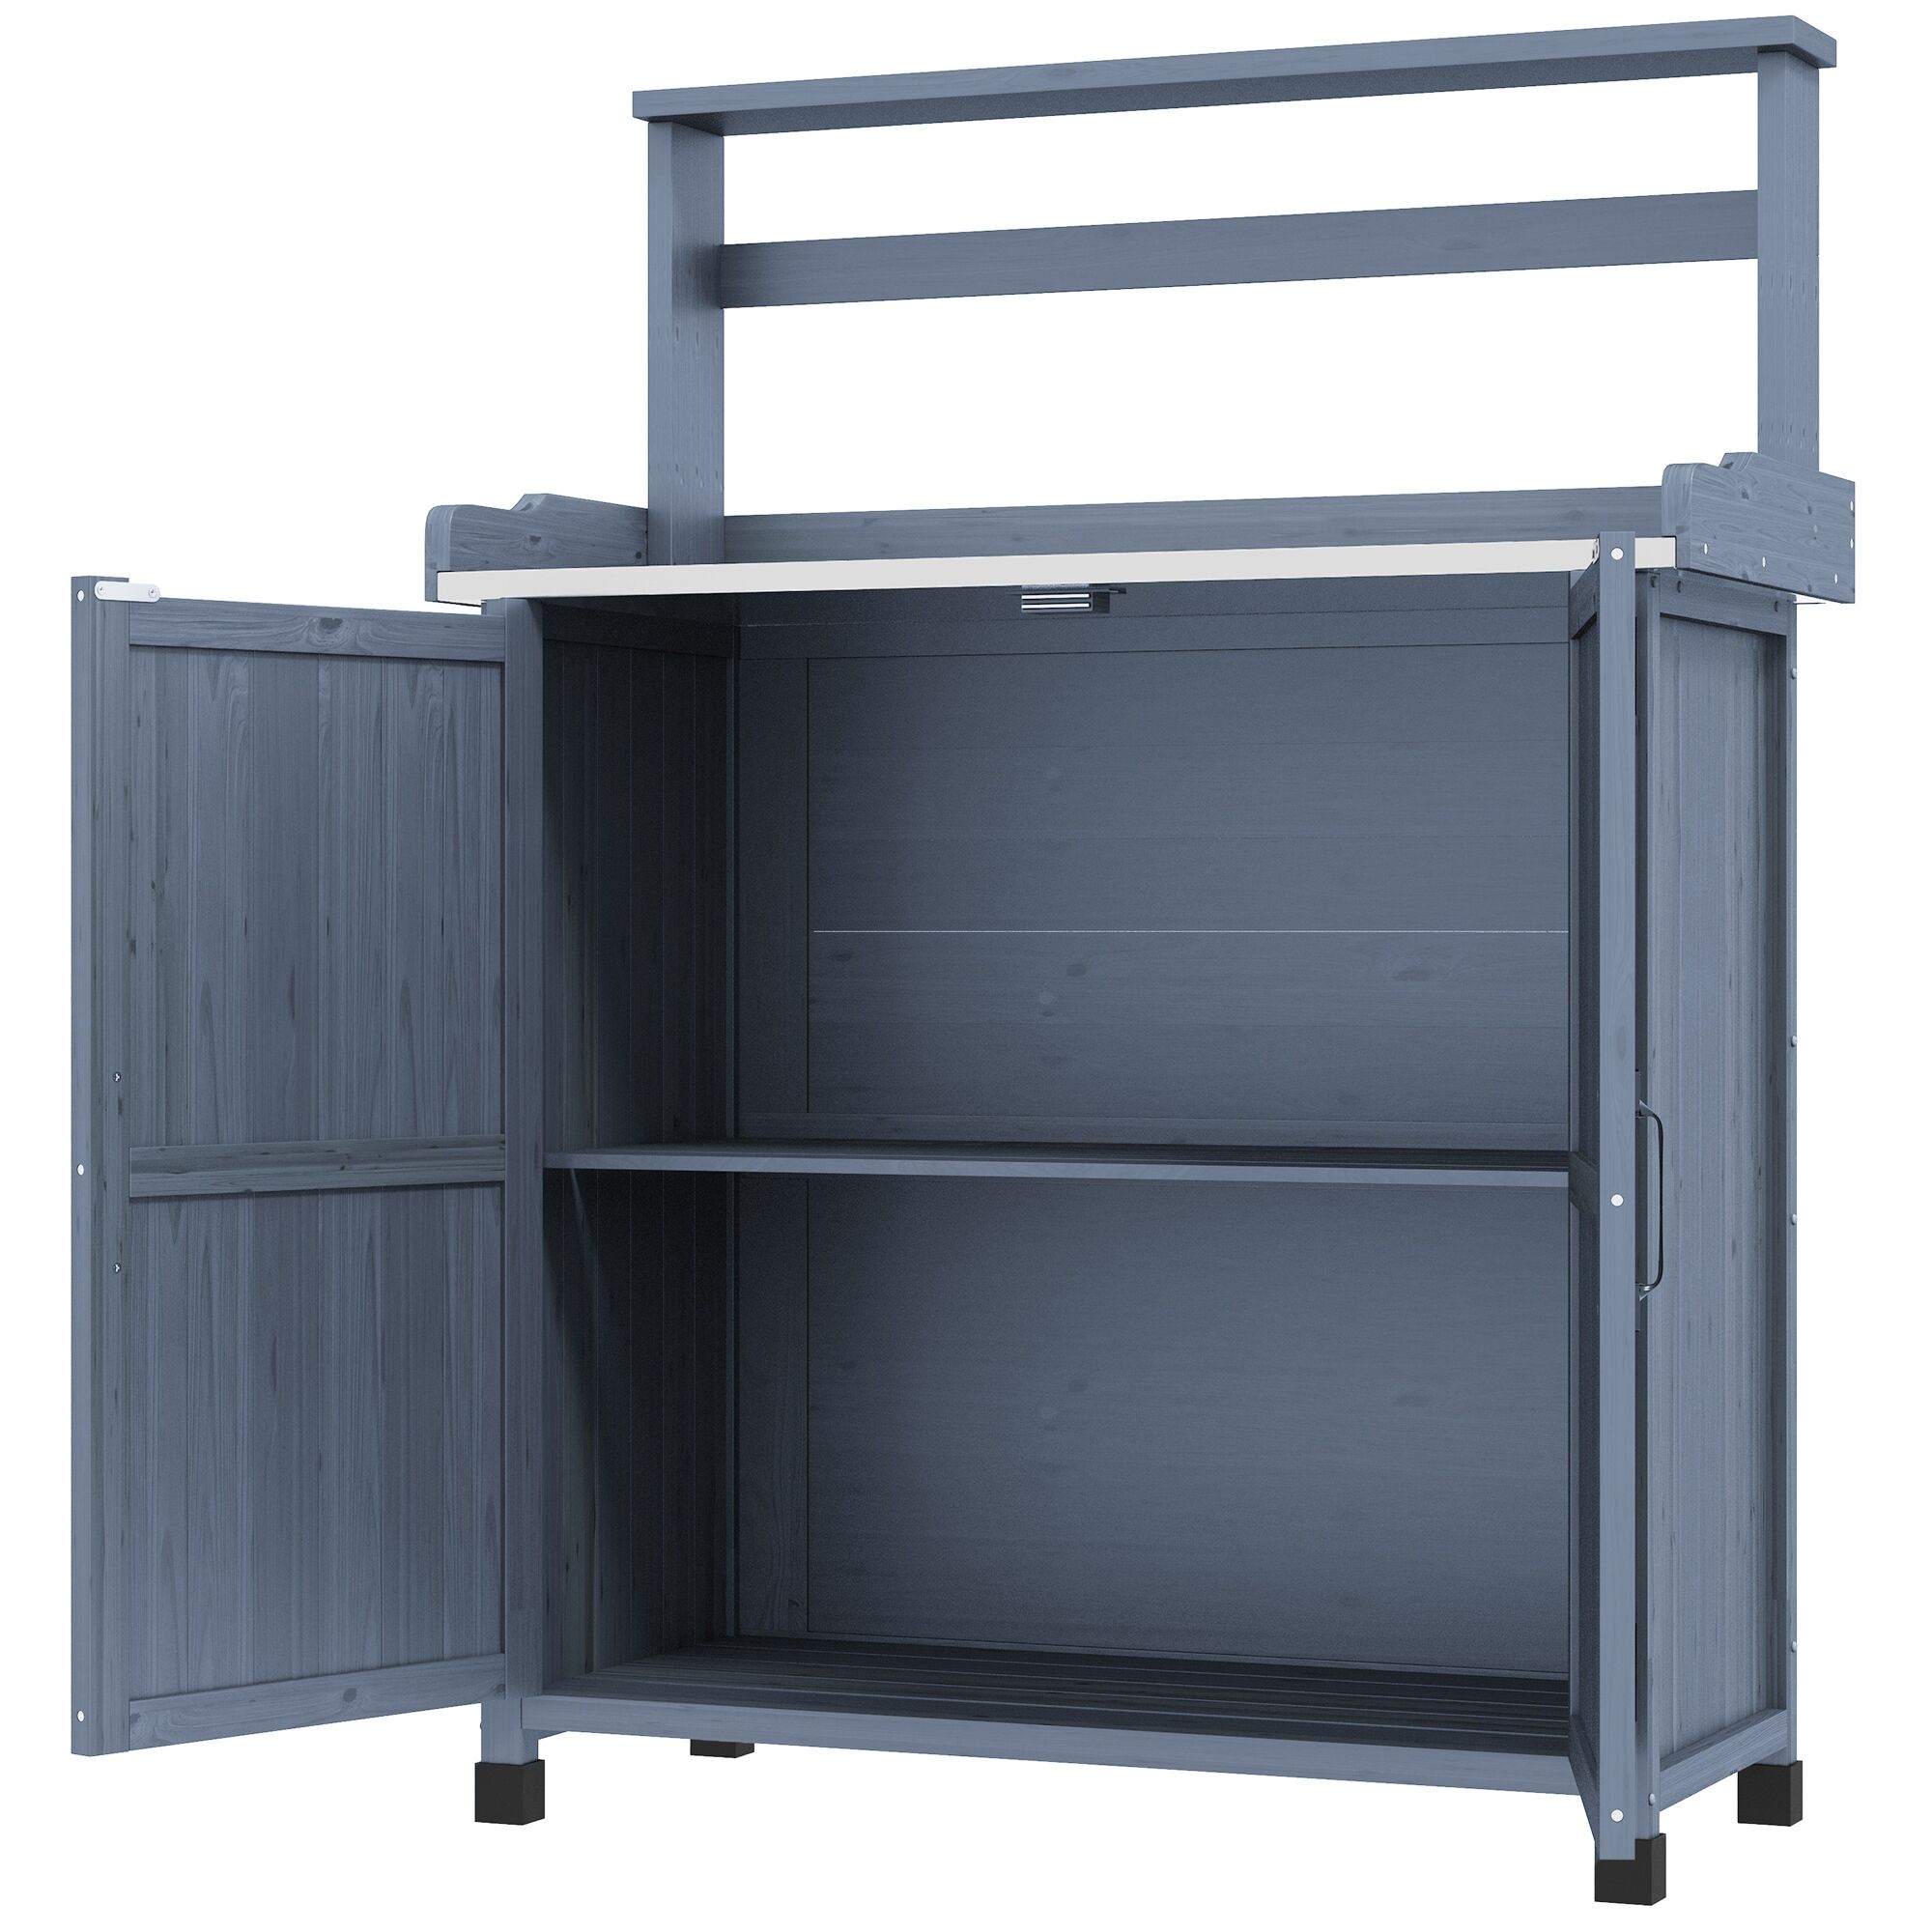 Outsunny Potting Bench Outdoor Wooden with Storage Cabinet Shelf Galvanized Tabletop Gray for Backyard   Aosom.com